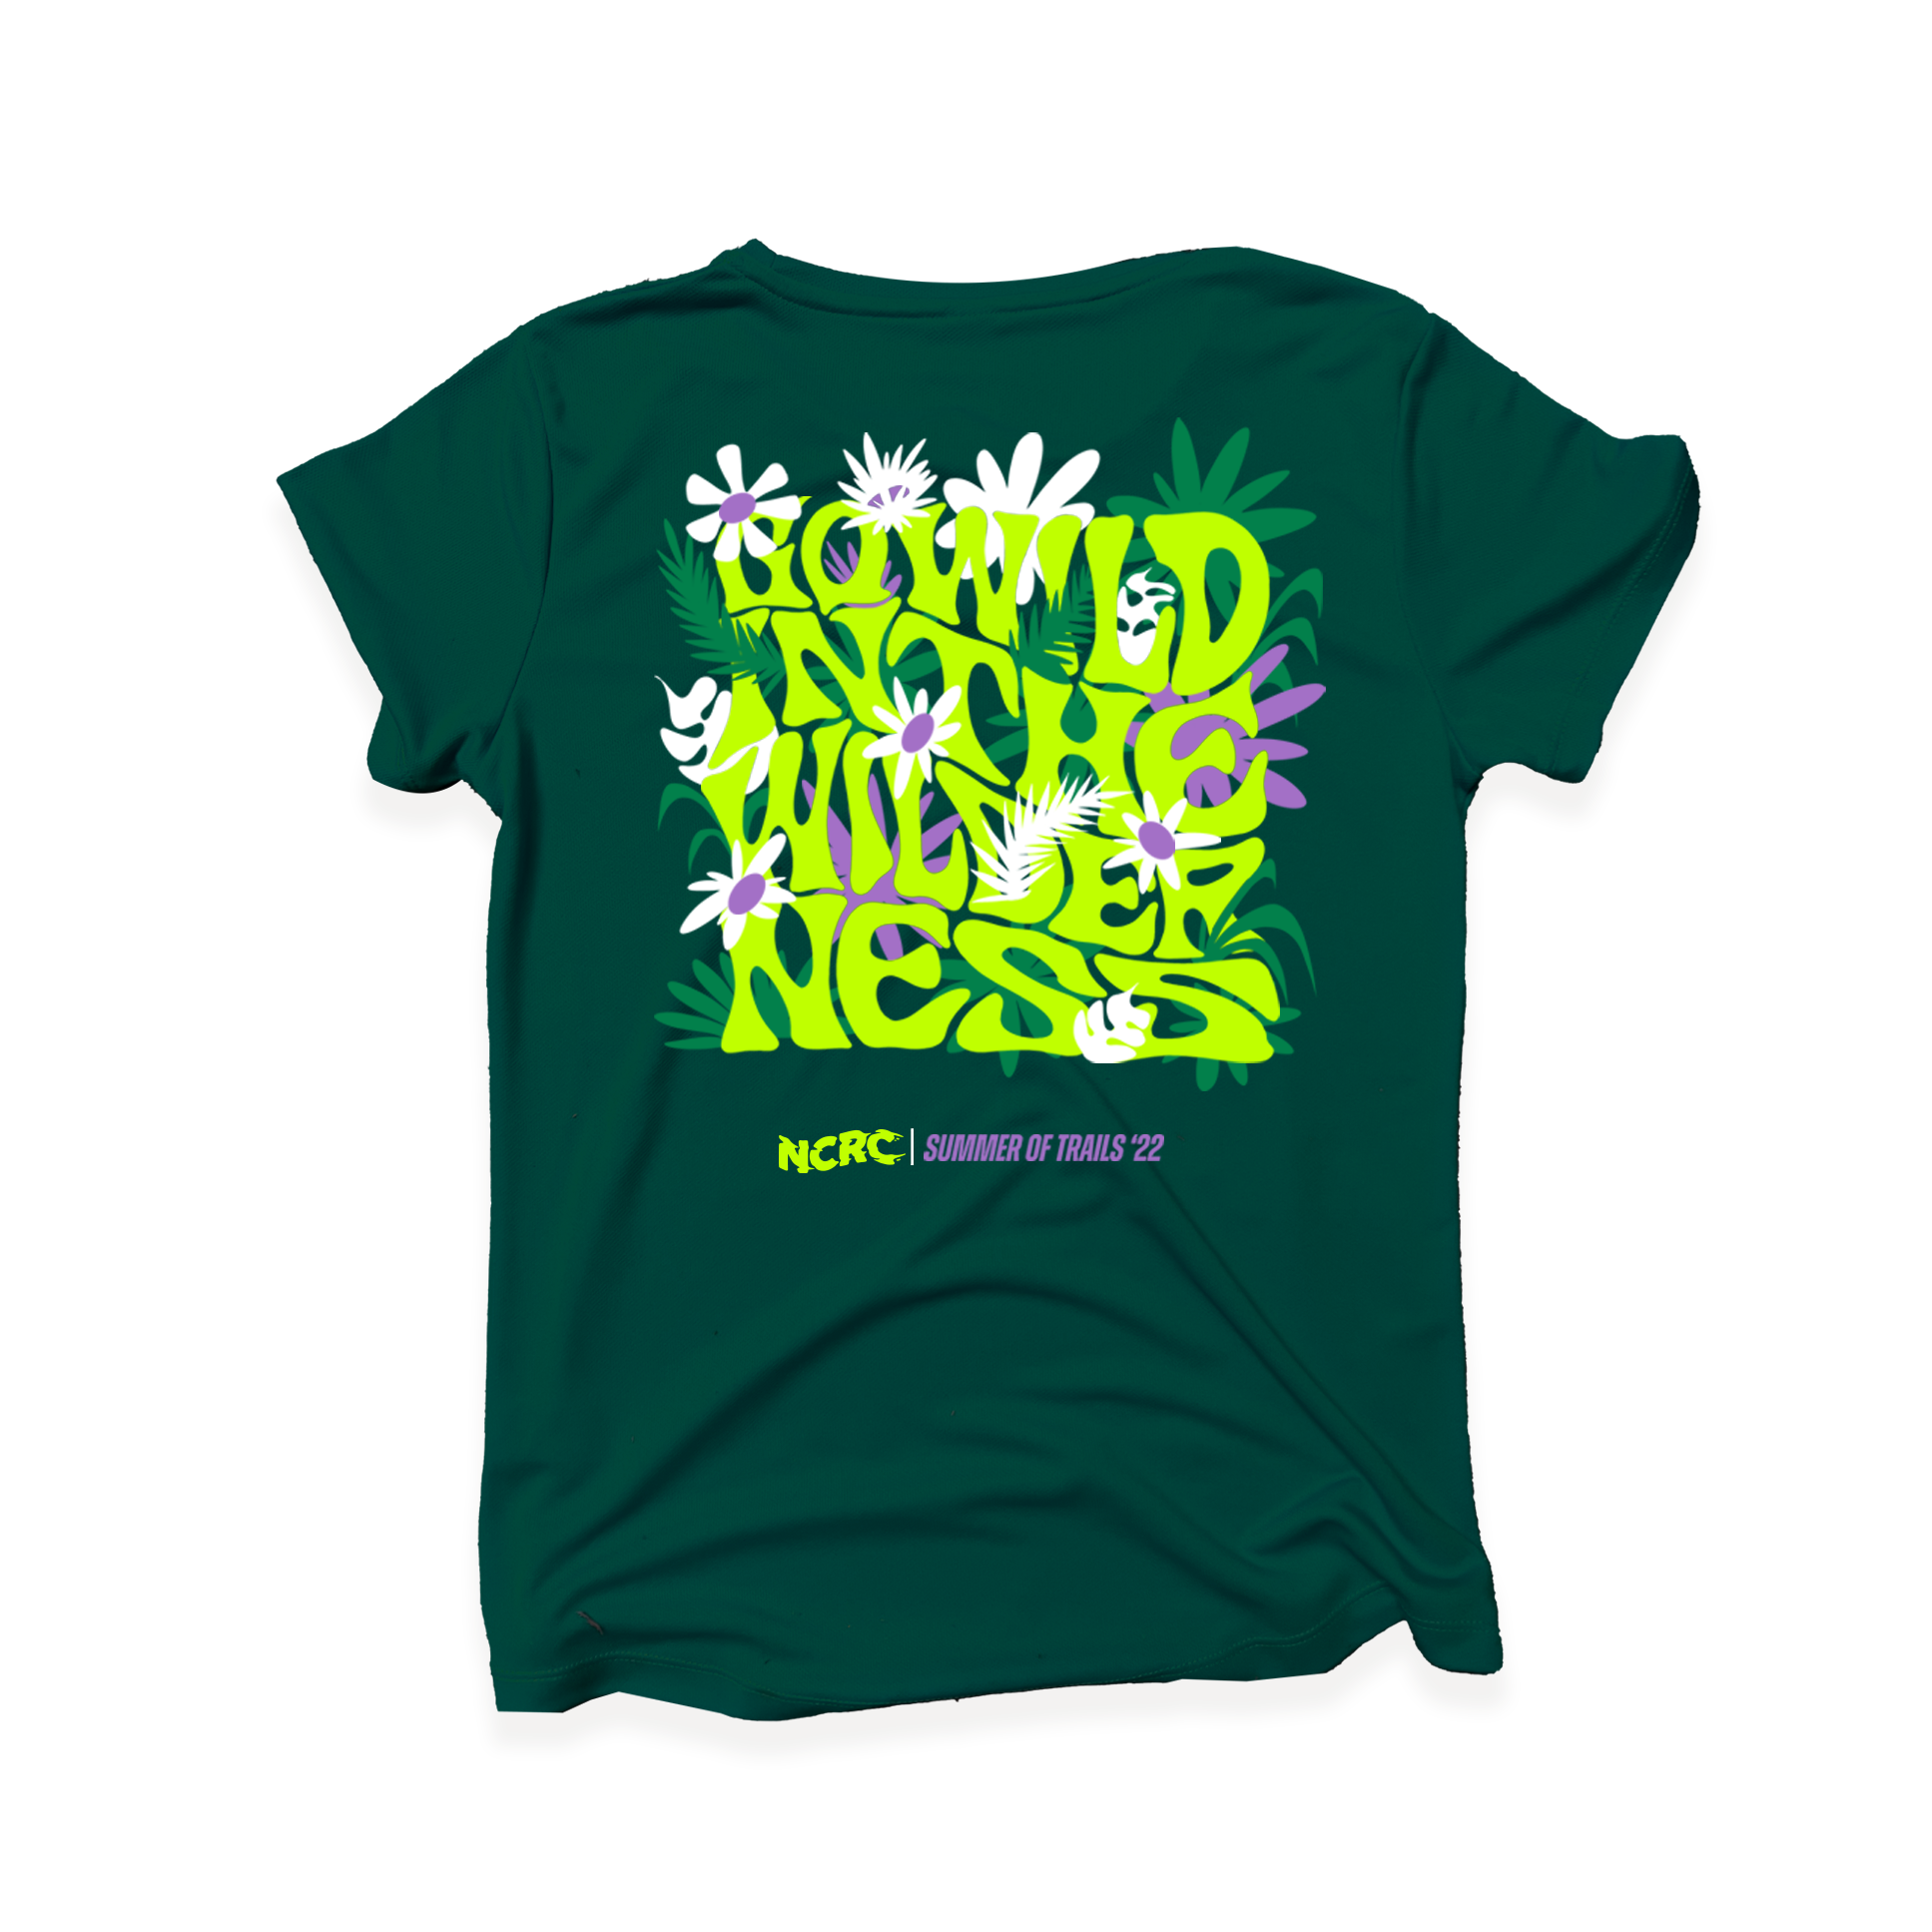 NCRC: Unisex Fits: Go Wild In The Wilderness - Summer Of Trails '22